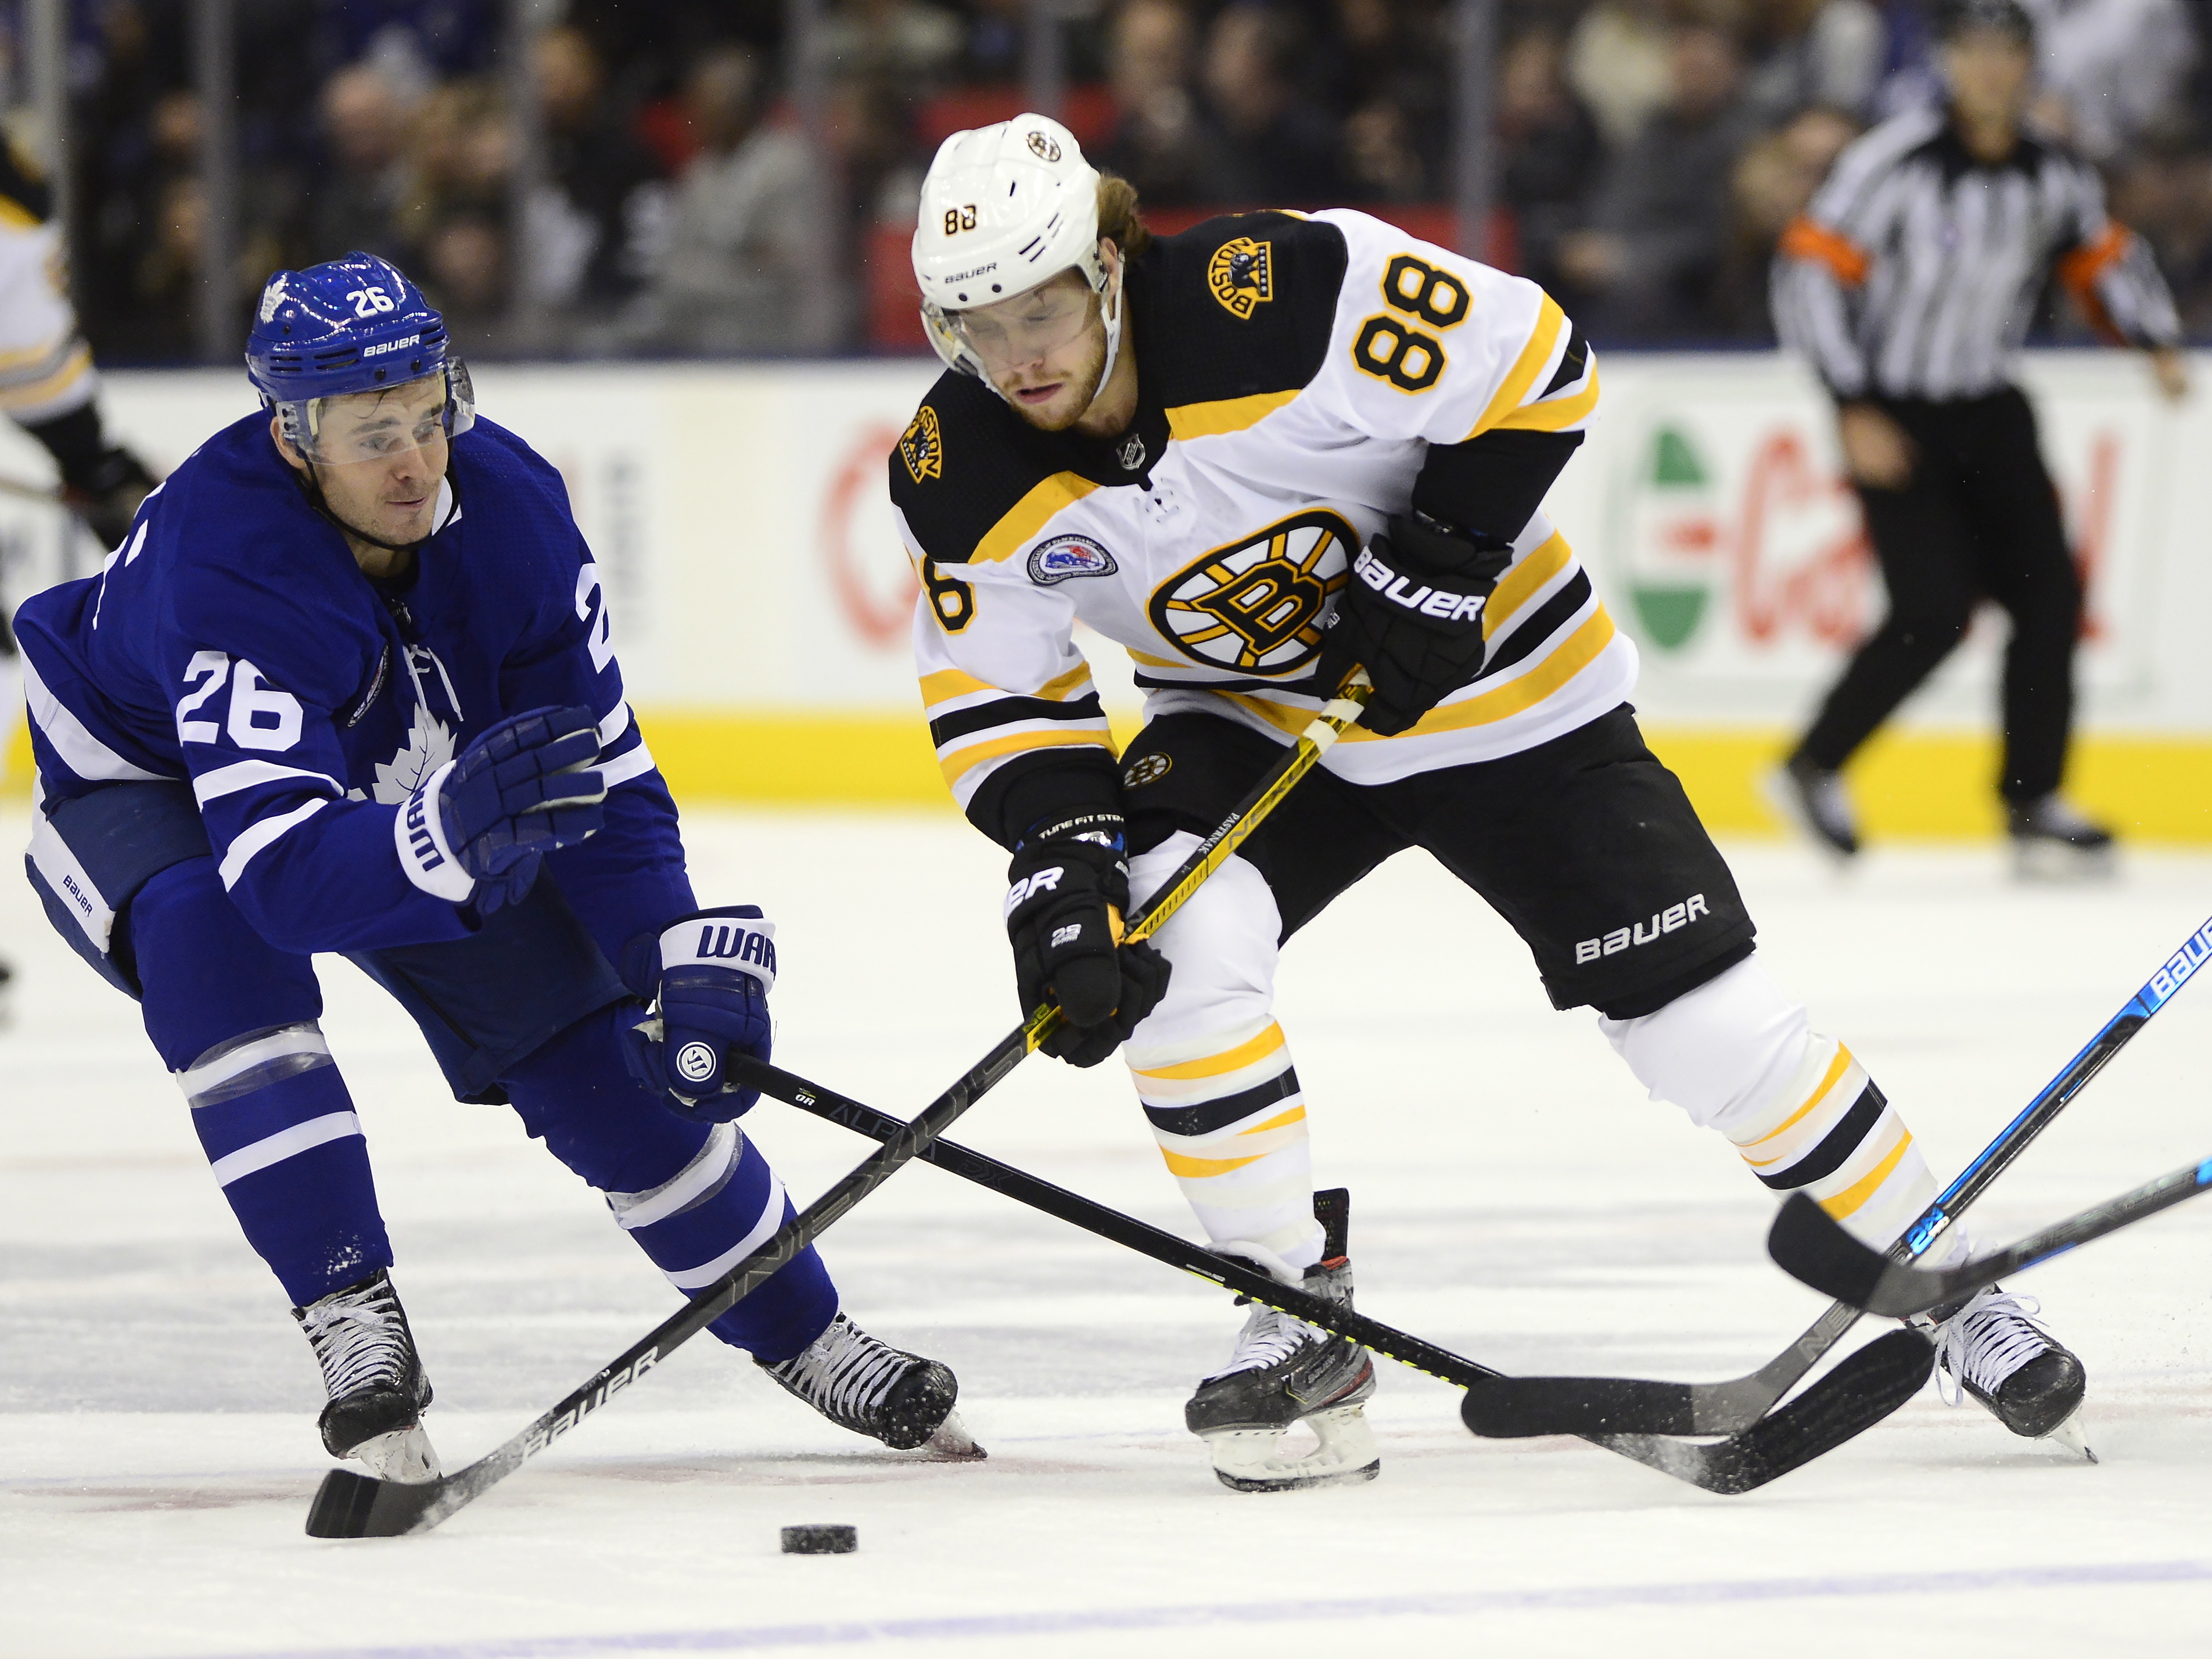 Marchand scored twice in 3rd, Bruins beat Maple Leafs 4-2